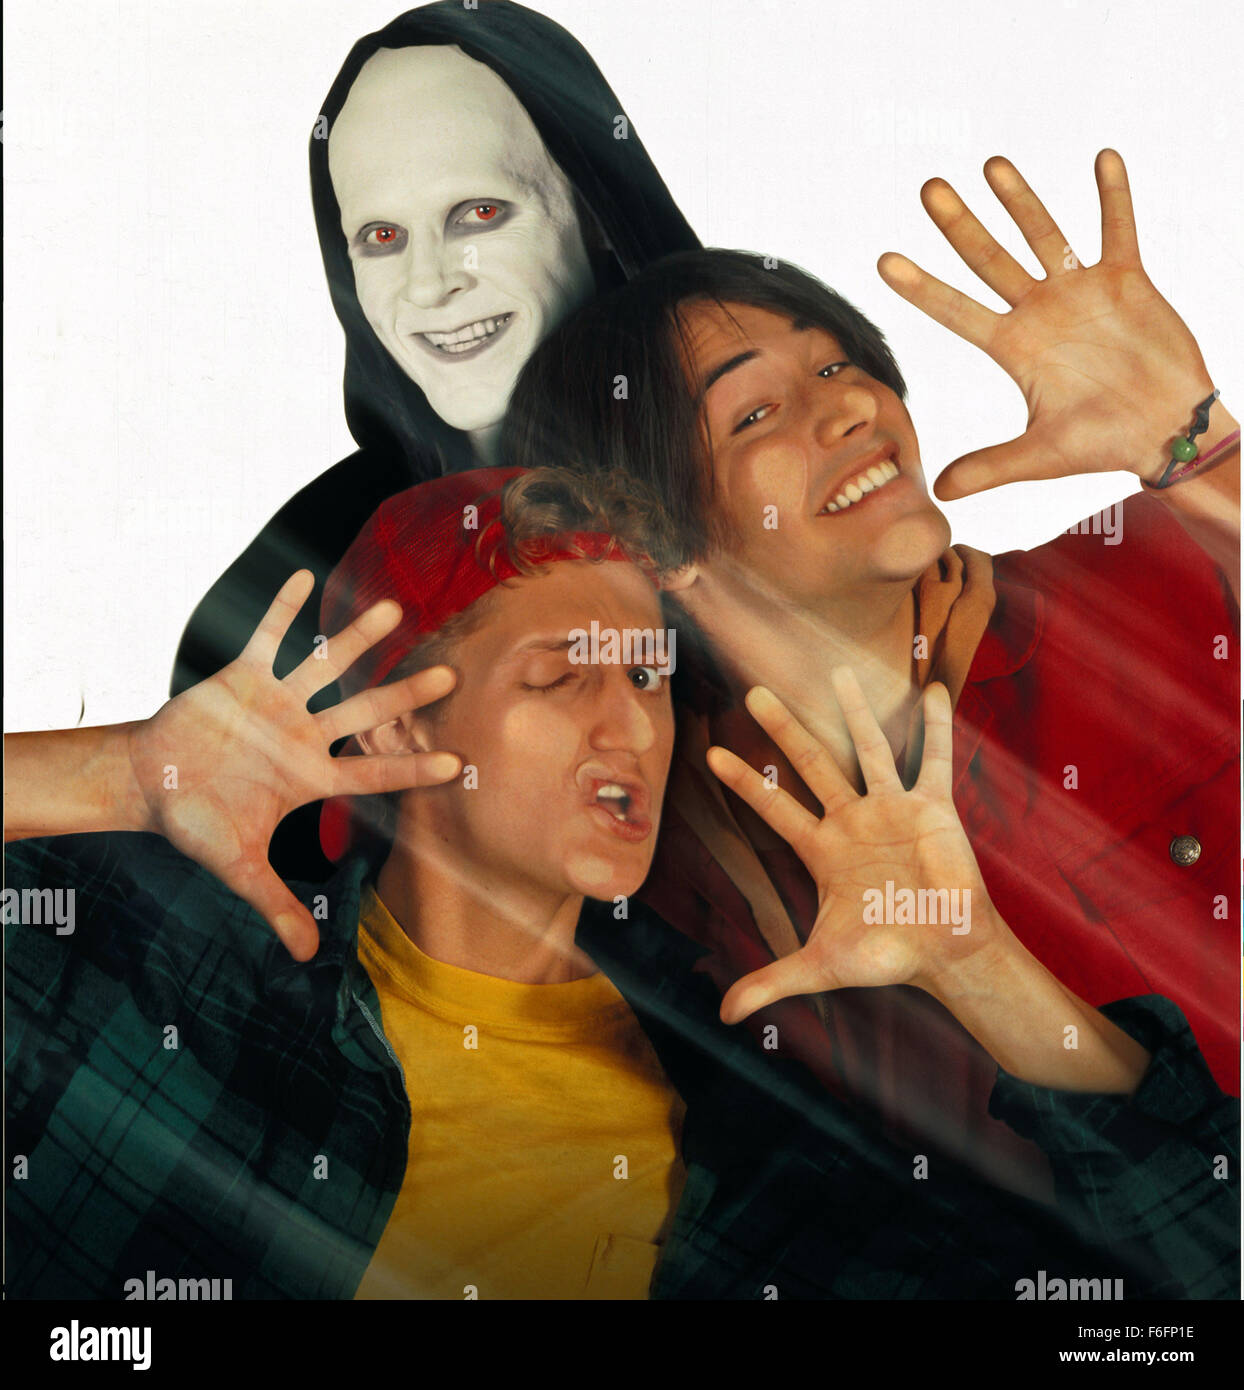 Jul 19, 1991; Los Angeles, CA, USA; (left to right) ALEX WINTERS as Bill S. Preston, Esq., WILLIAM SADLER as Grim Reaper, and KEANU REEVES as Ted Logan in the adventure, sci-fi, comic film 'Bill and Ted's Bogus Journey' directed by Peter Hewitt. Stock Photo